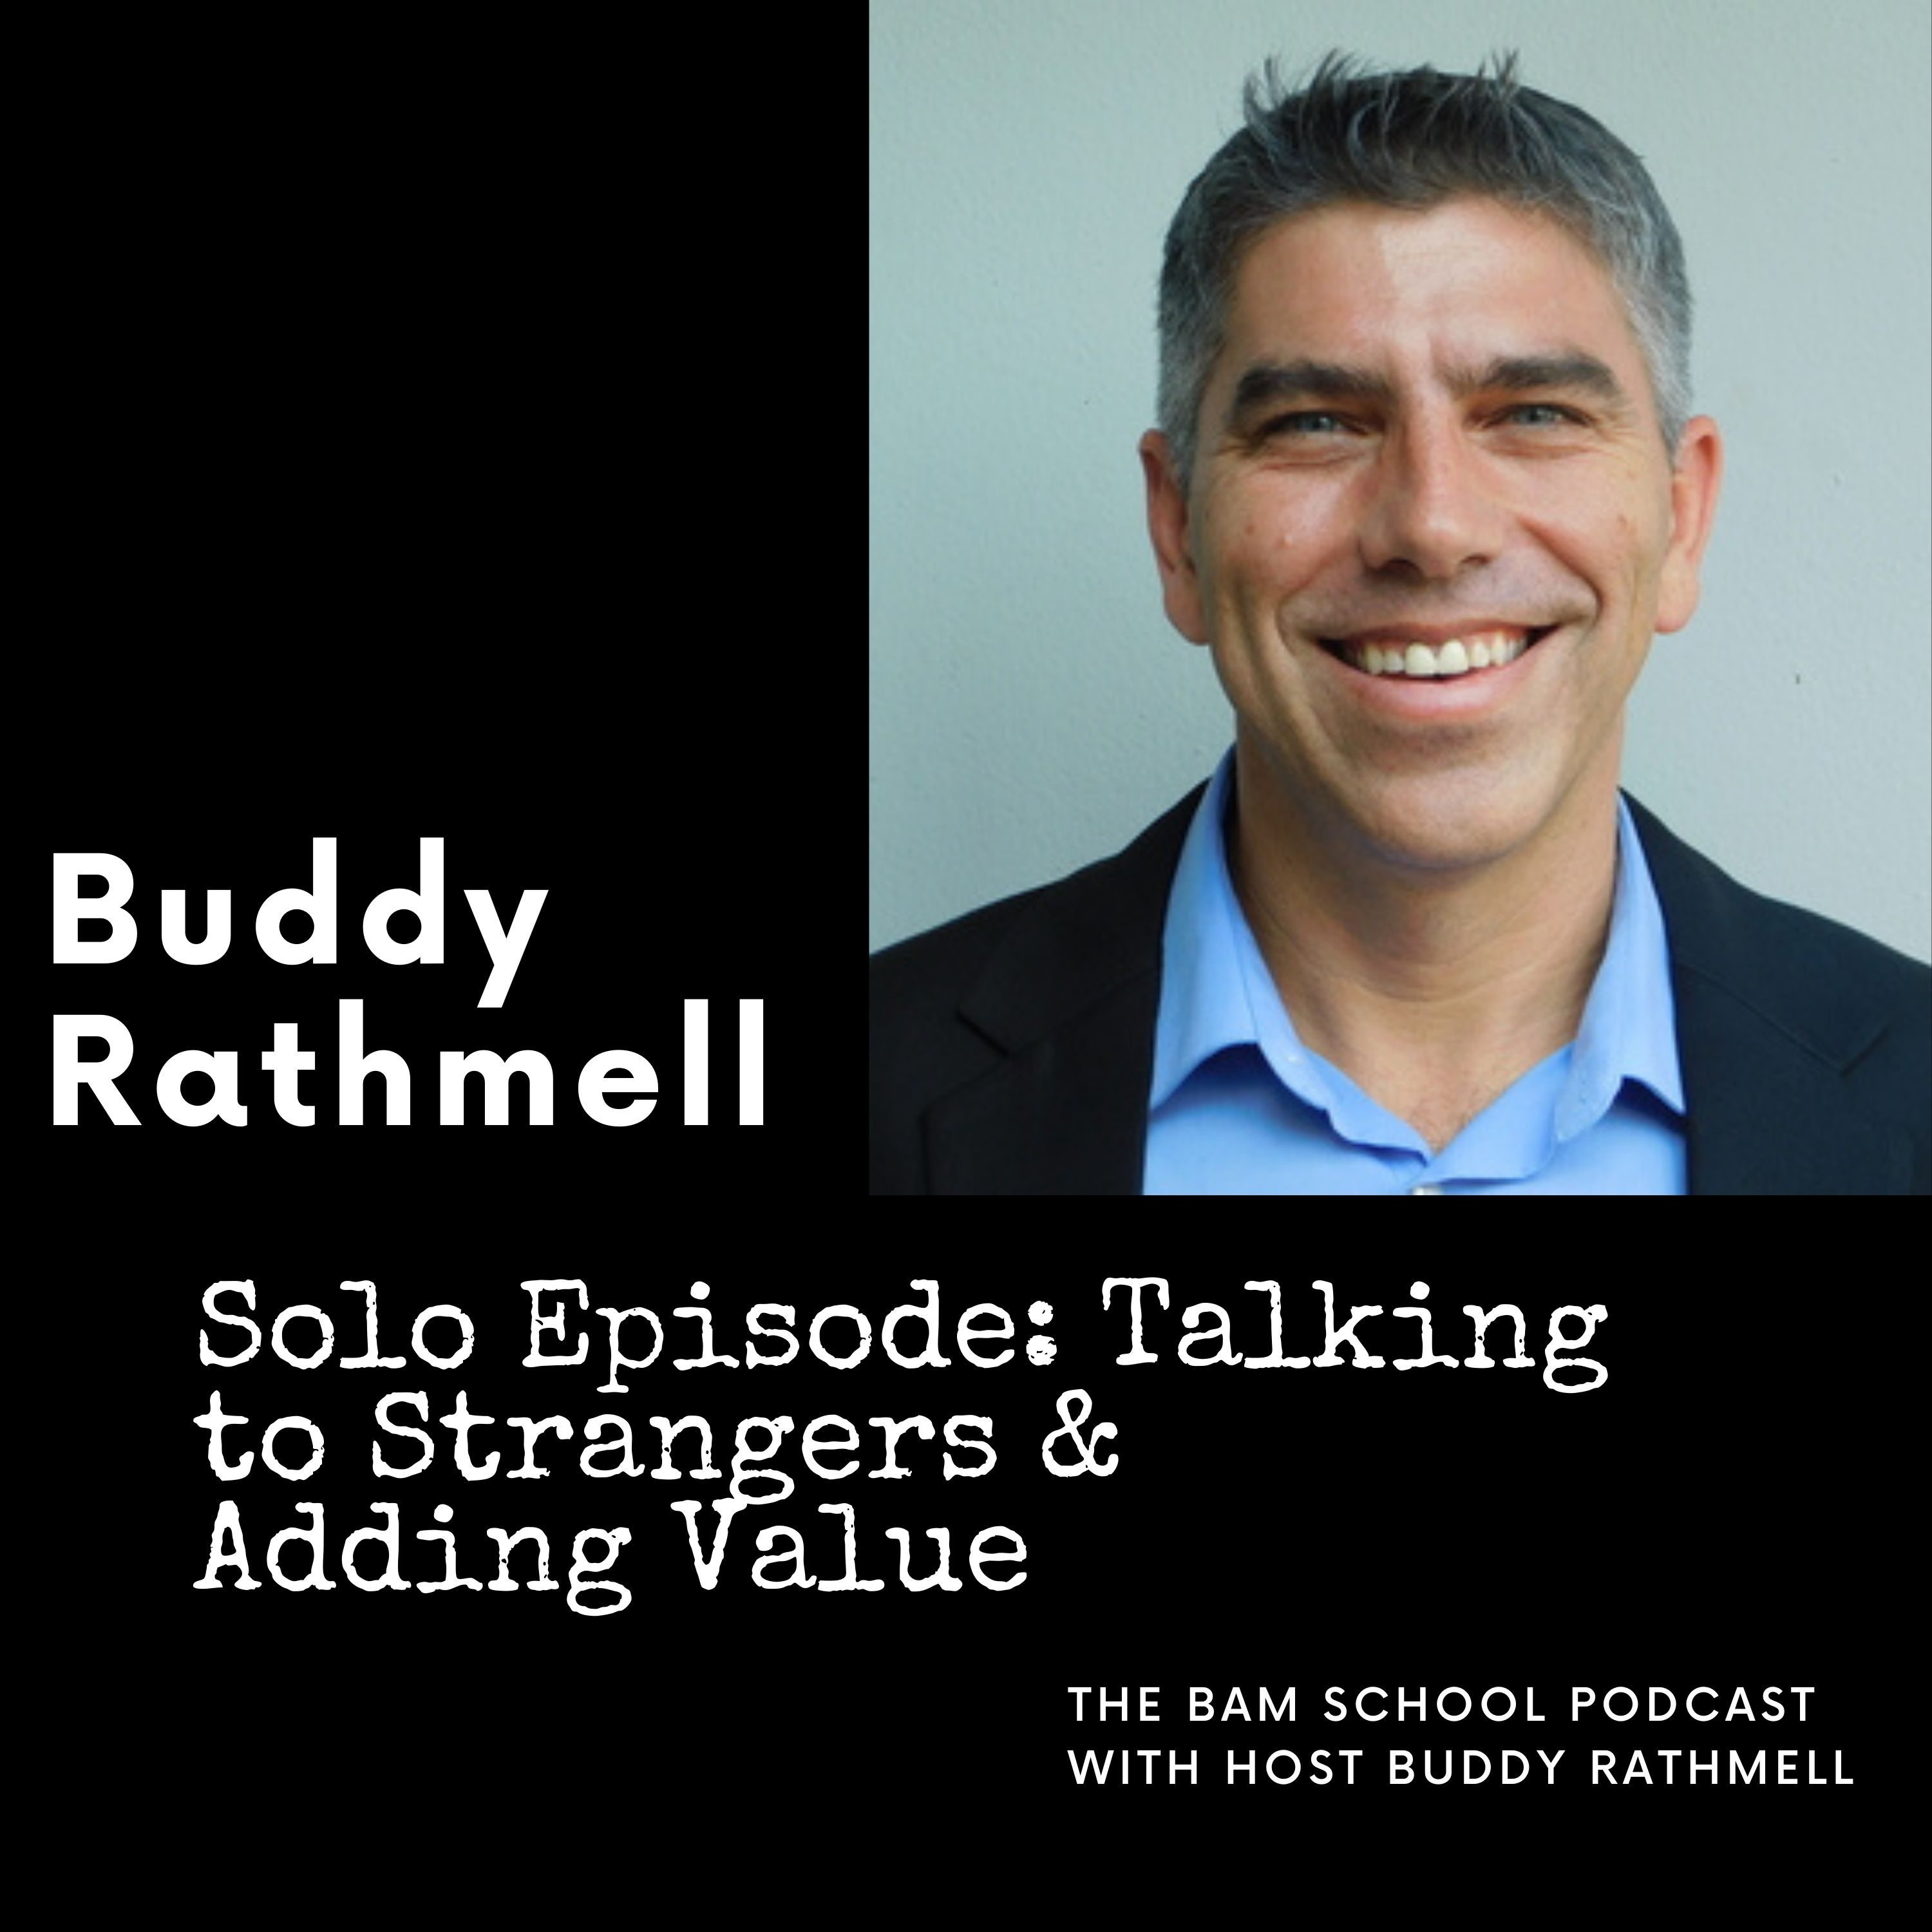 The Value of Talking to Strangers & Adding Value